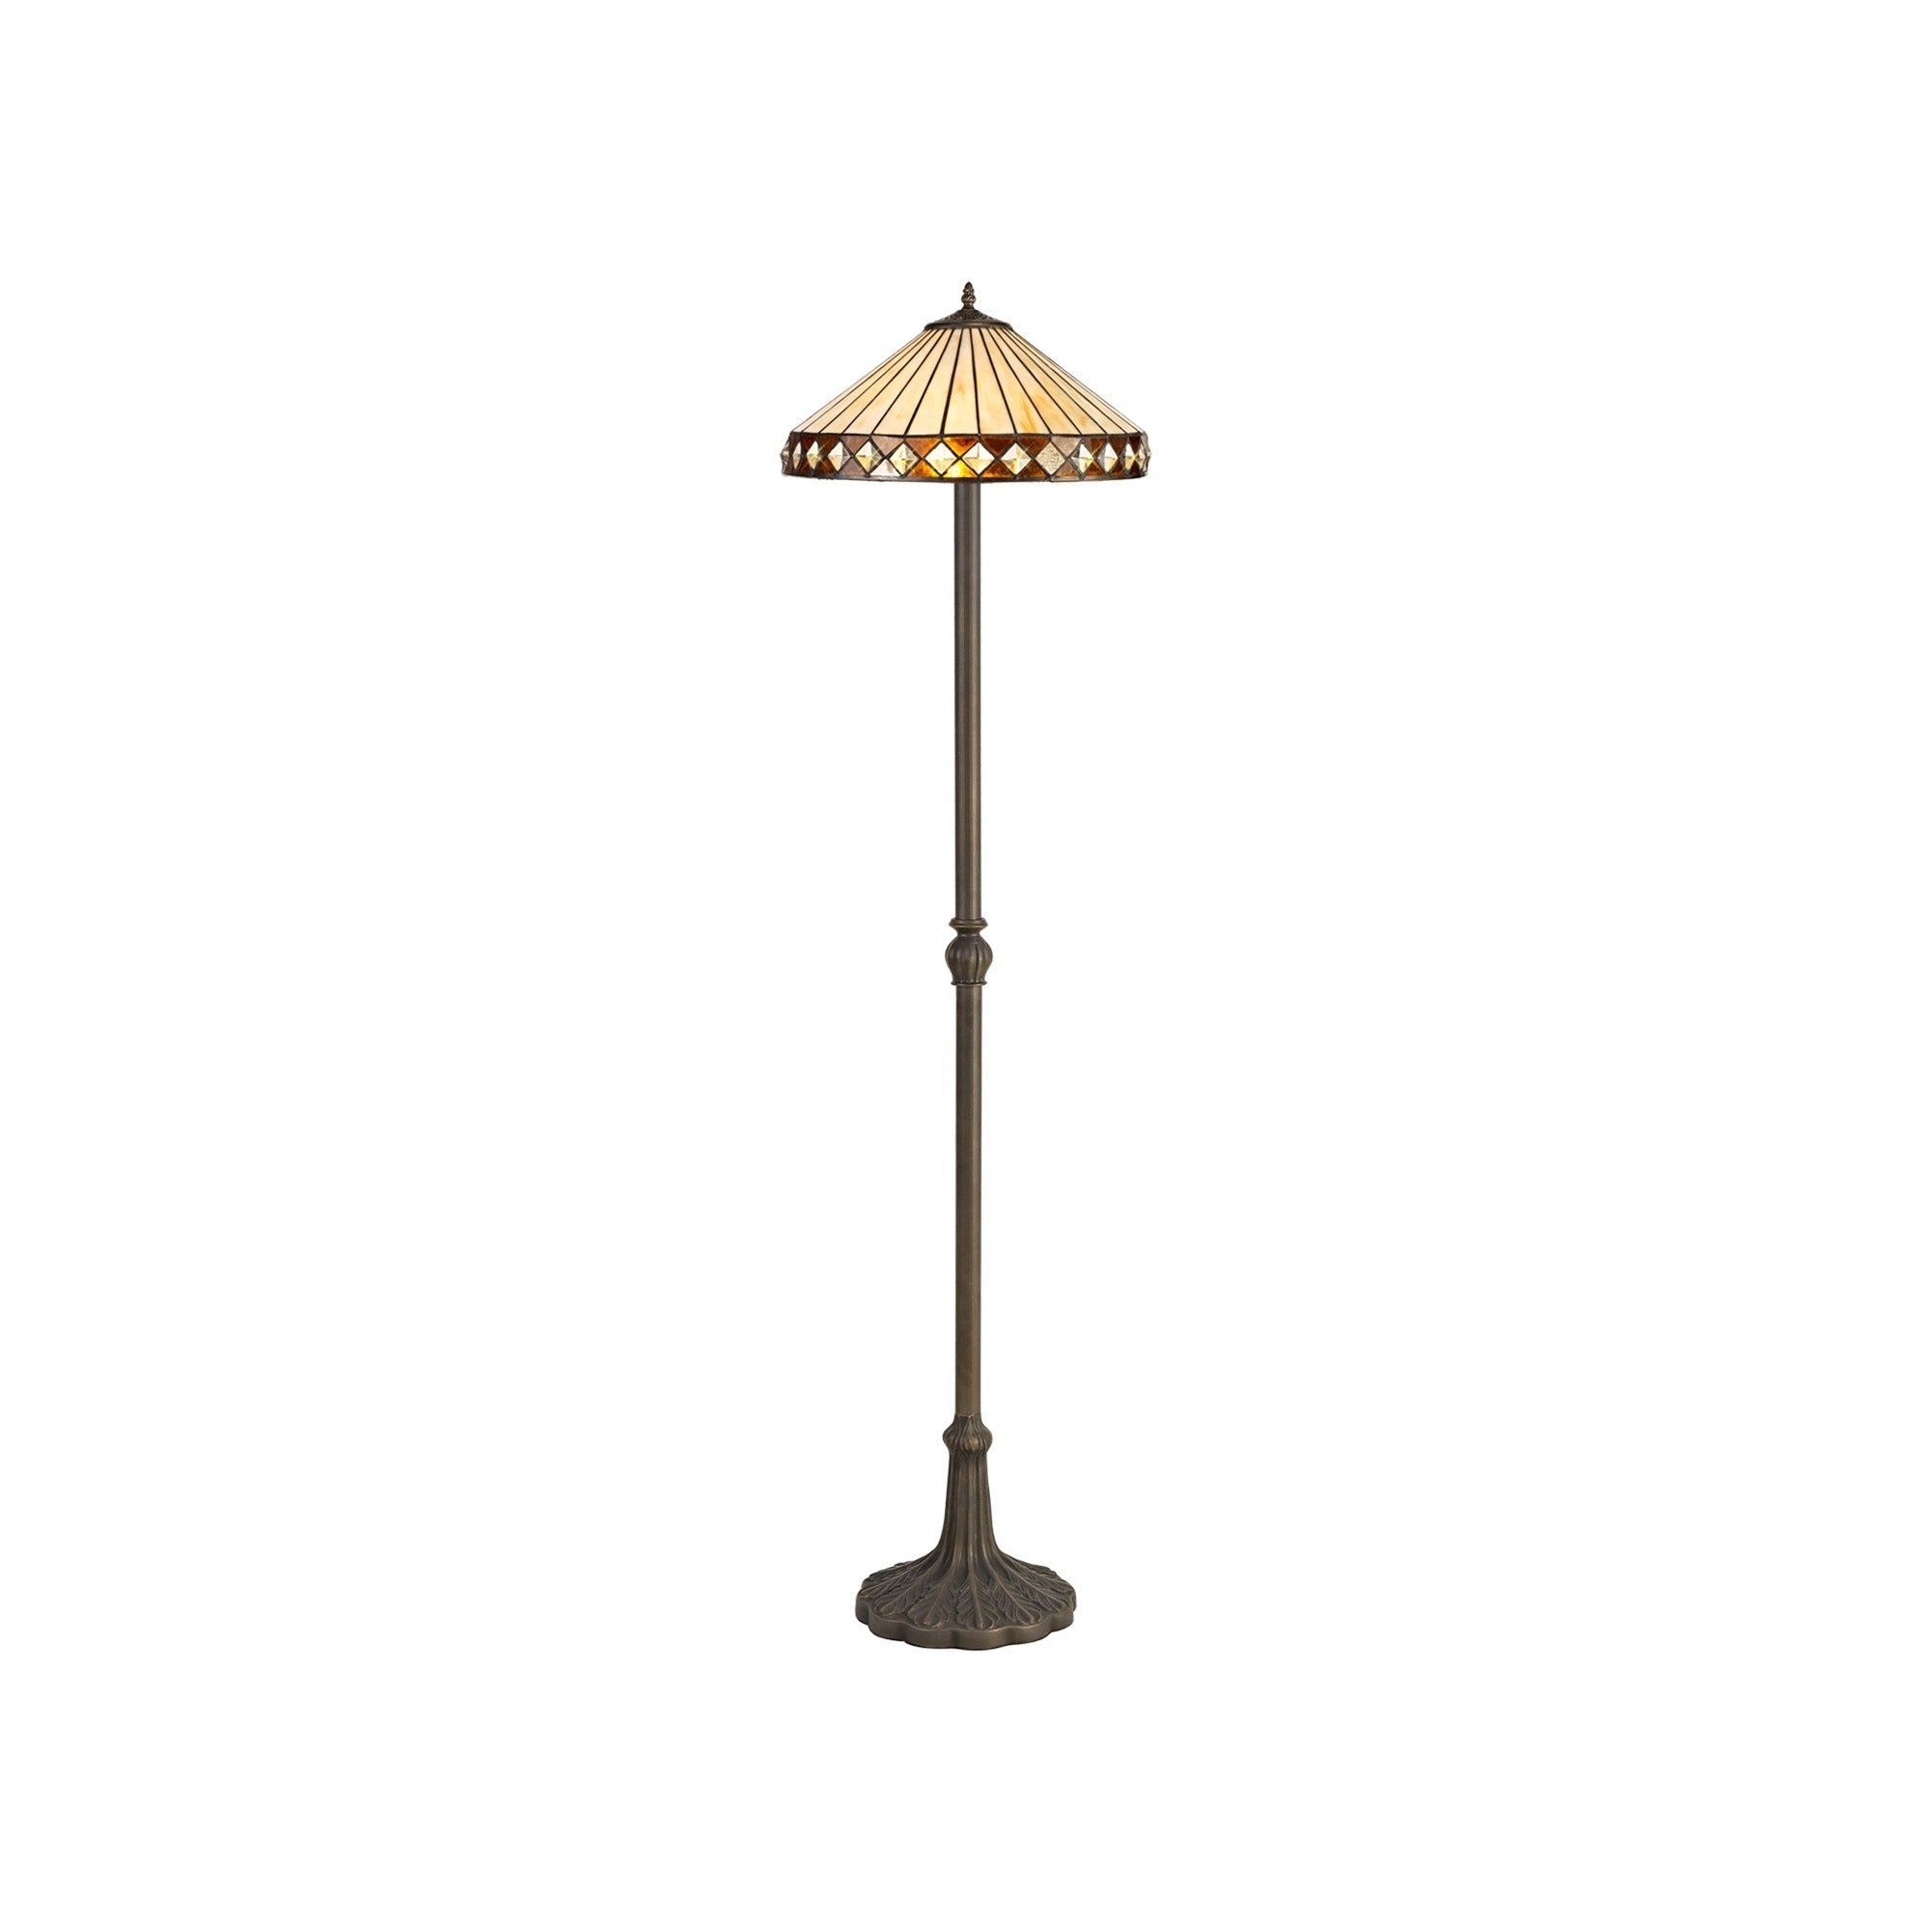 Isrmian 2 Light Leaf/Octagonal/Stepped Design Floor Lamp E27 With 40cm Tiffany Shade, Amber/Cream/Crystal/Aged Antique Brass